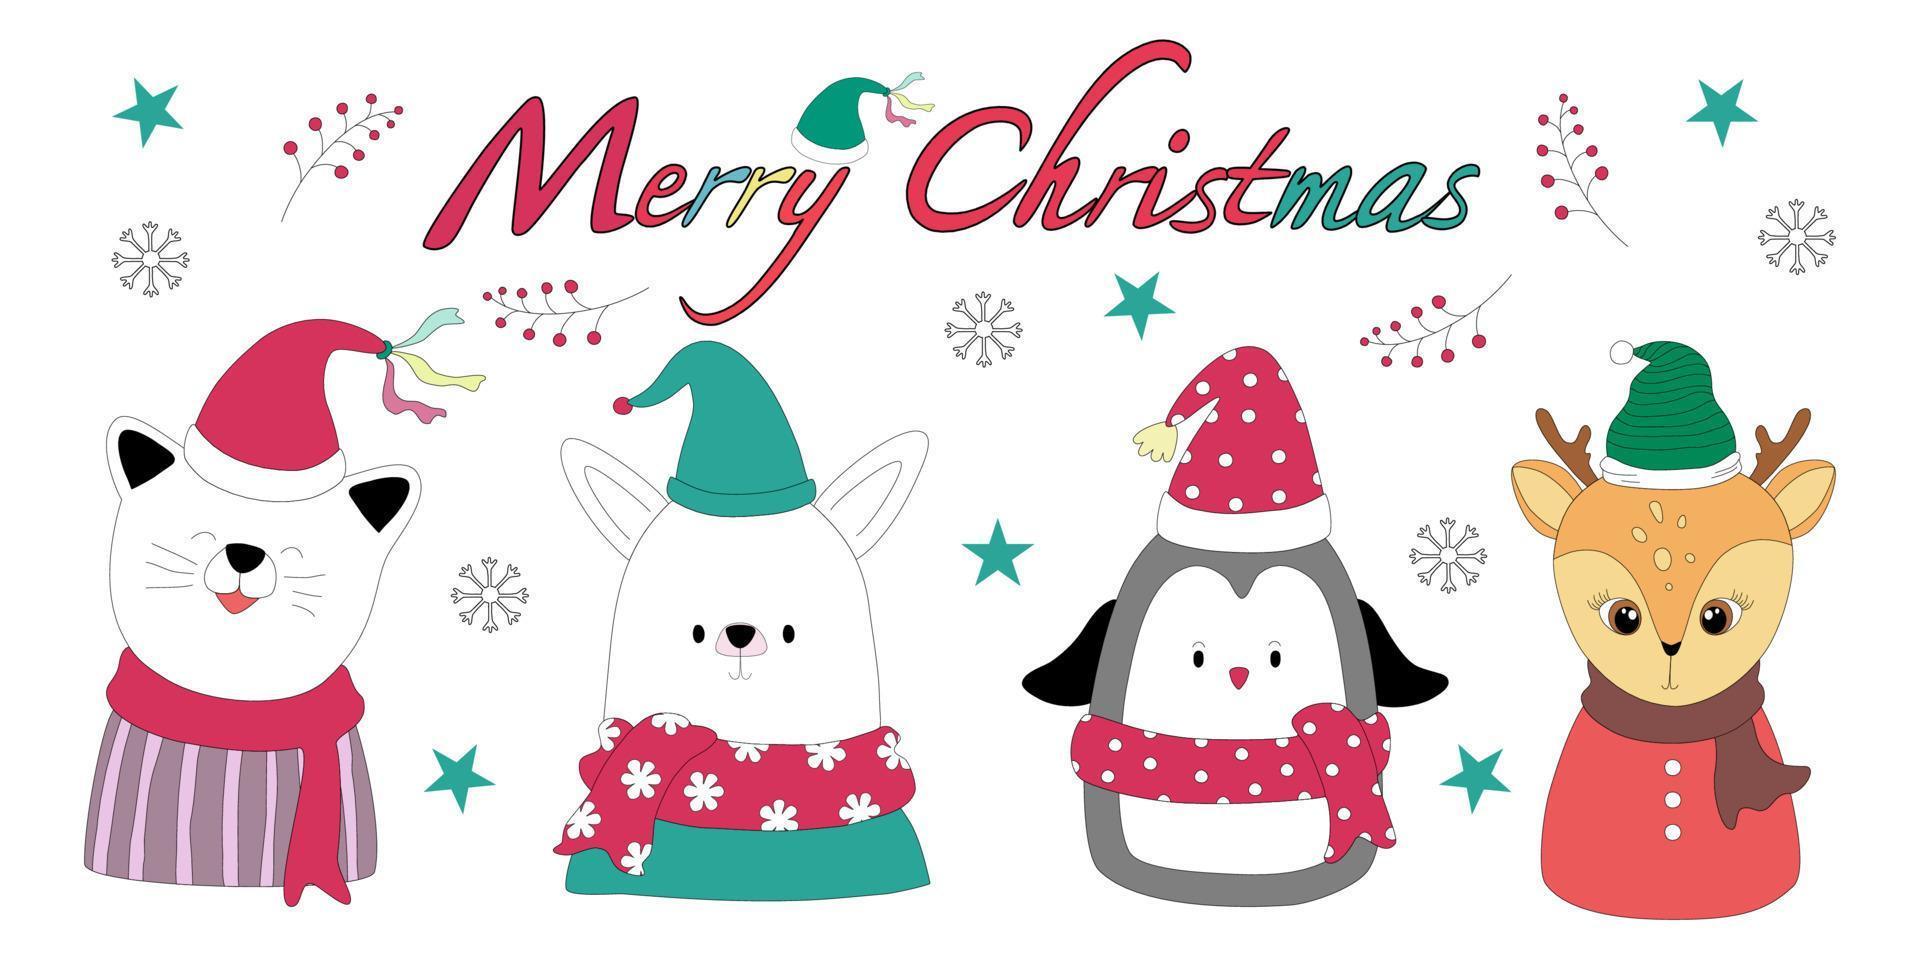 Merry Christmas with cute character clip art designed in doodle style that can be applied to different Christmas themes according to your preferences. vector